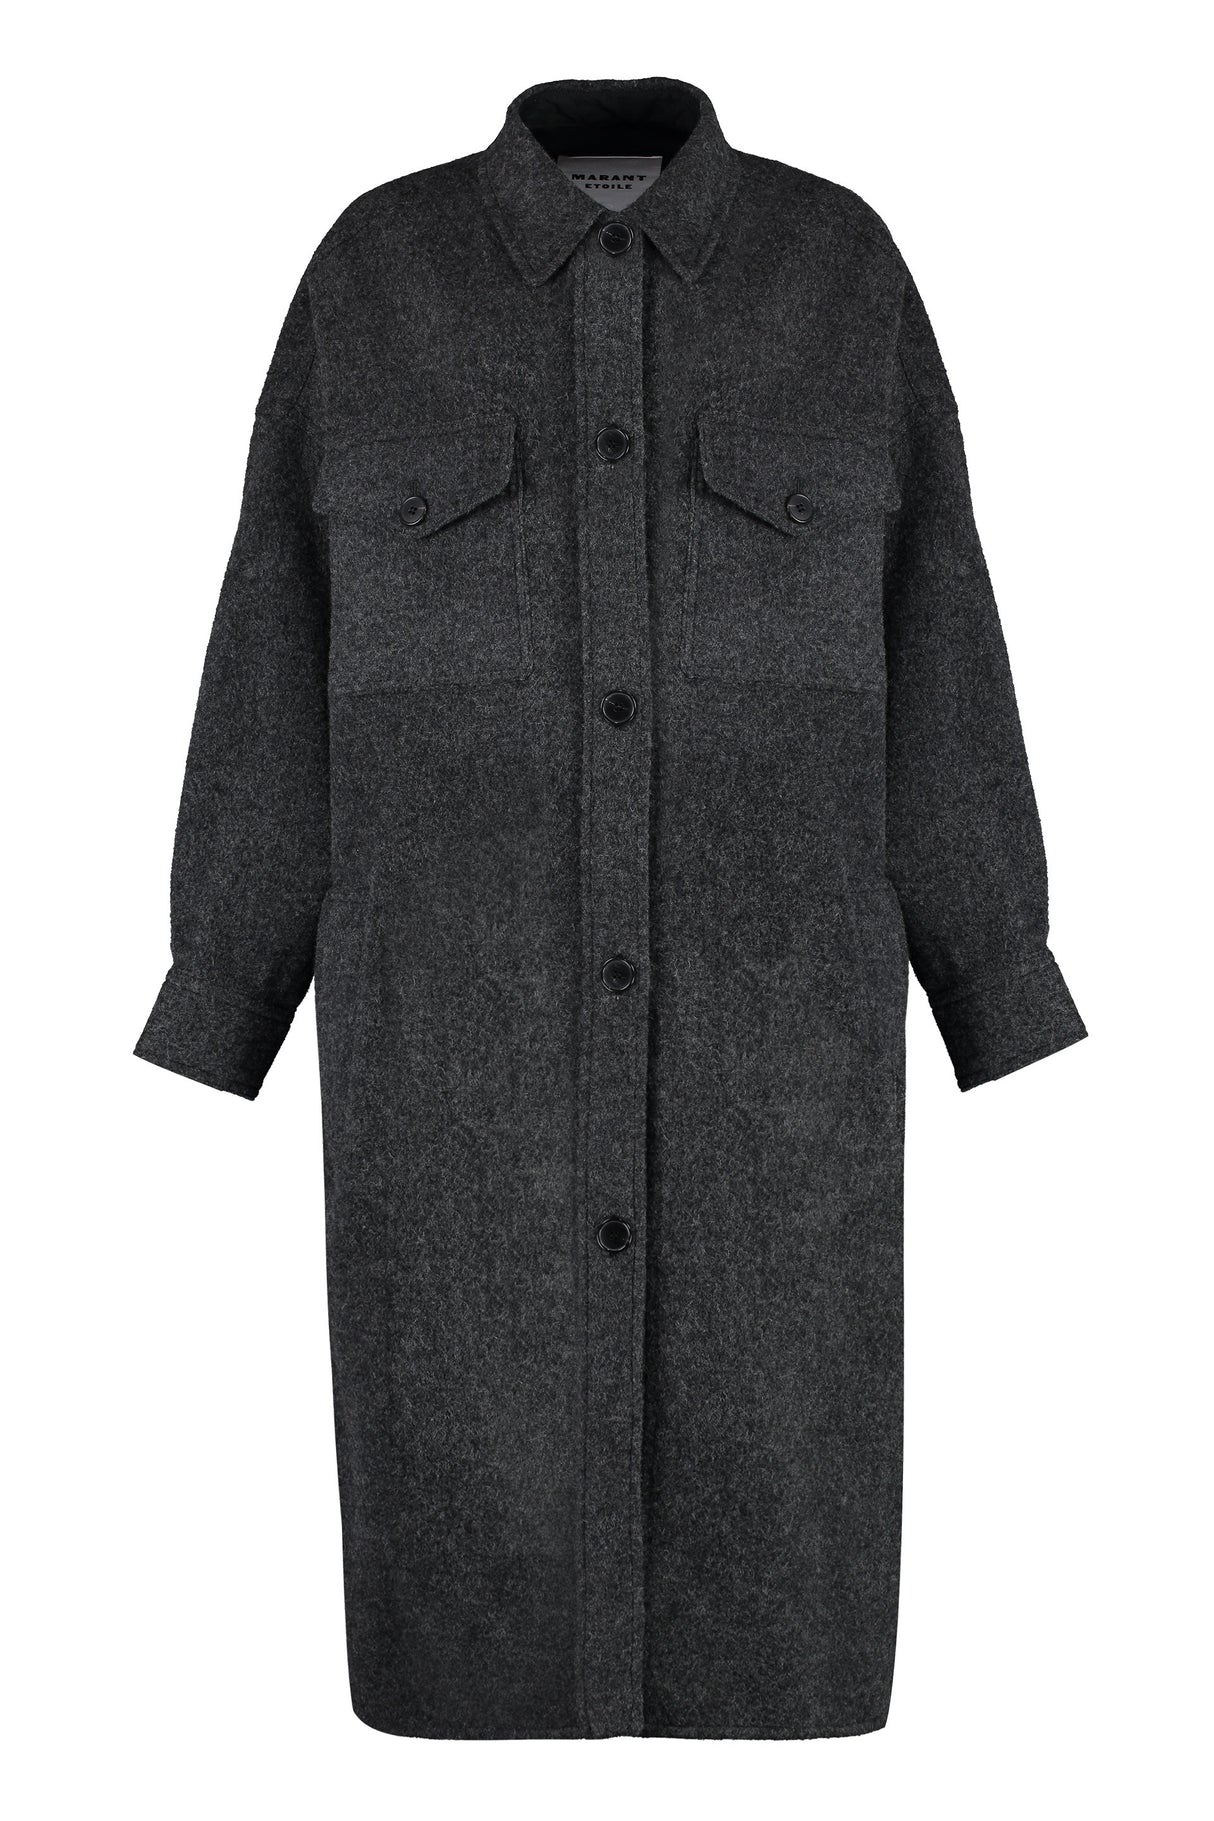 Wool Blend Jacket with Shirt Style Collar and Cuffs for Women - FW23